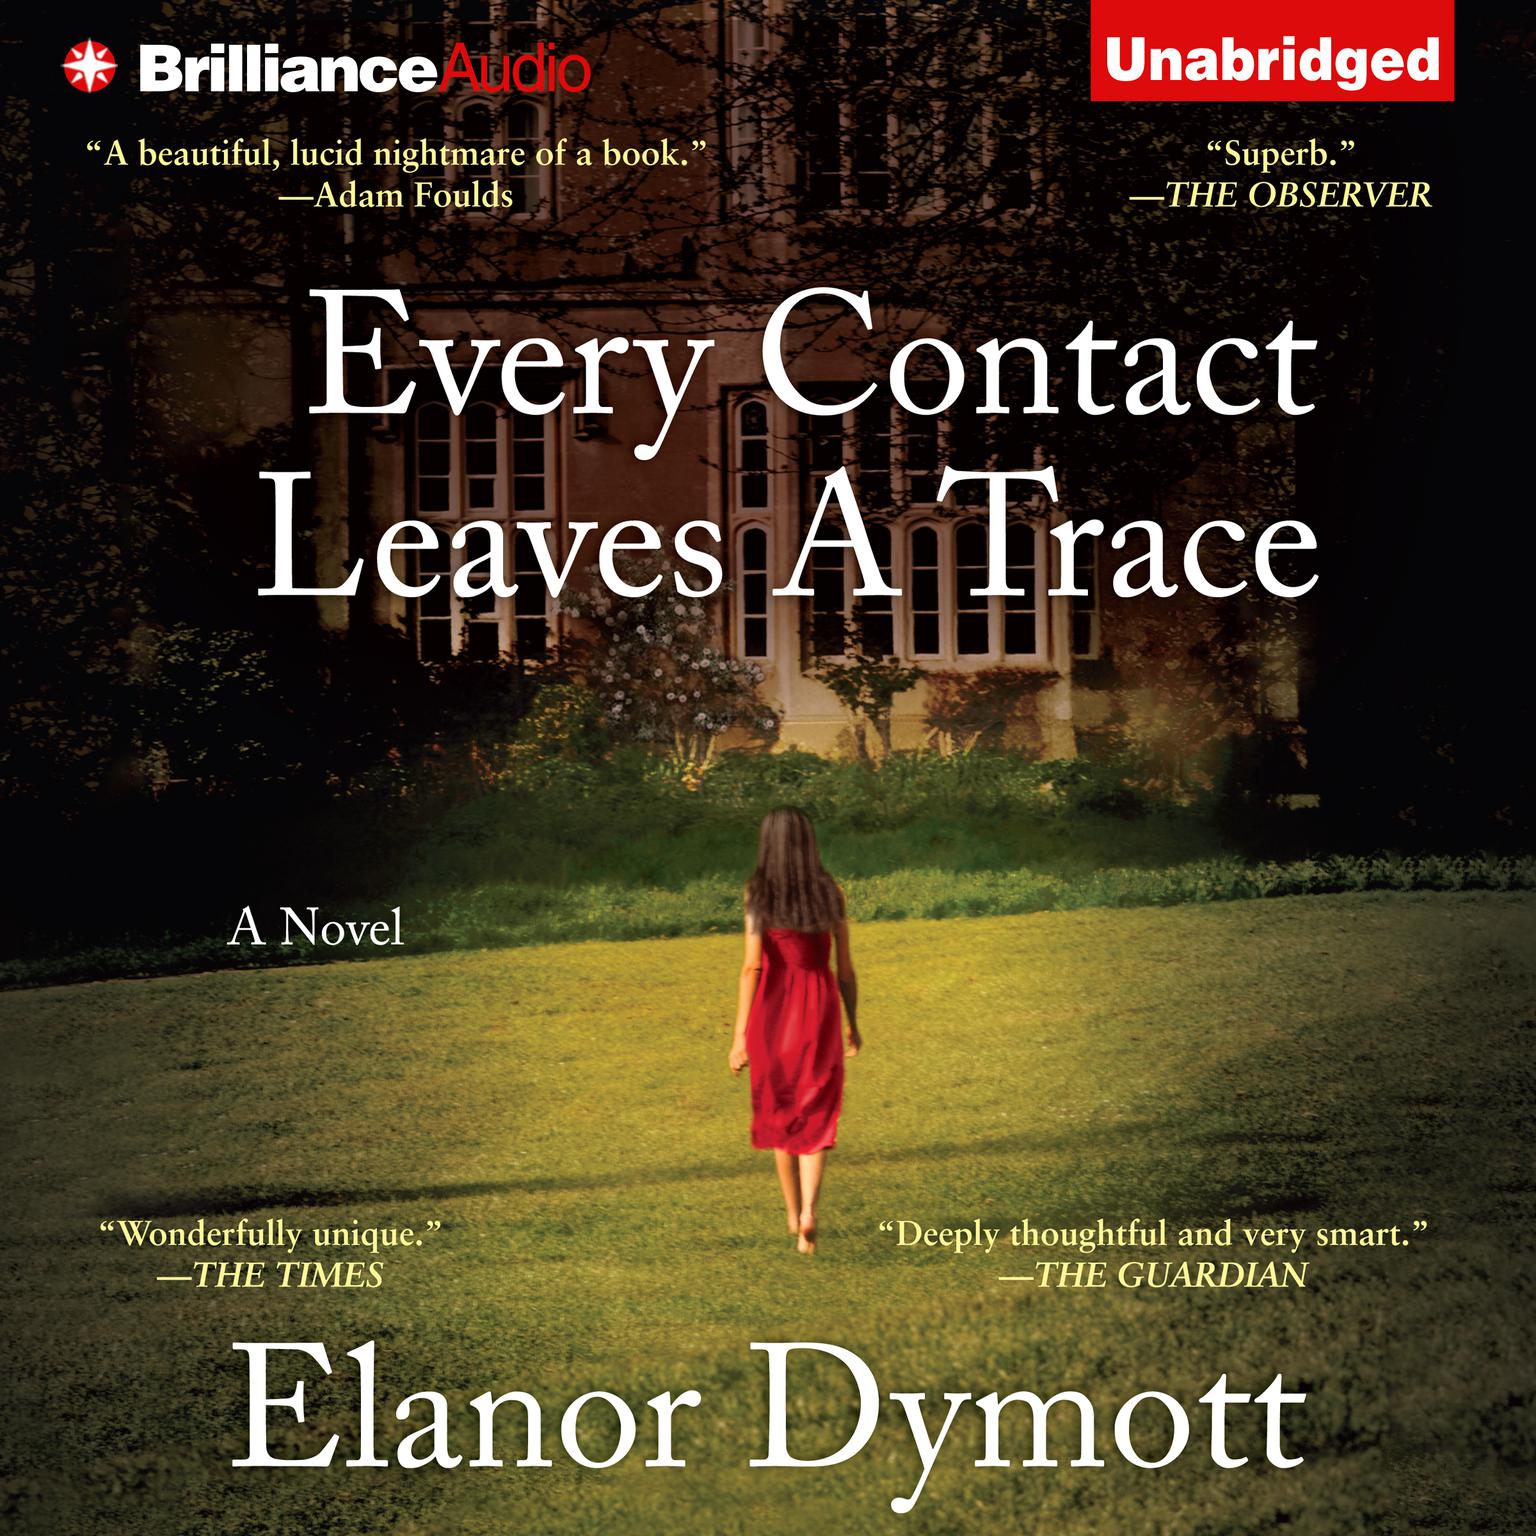 Every Contact Leaves a Trace Audiobook, by Elanor Dymott